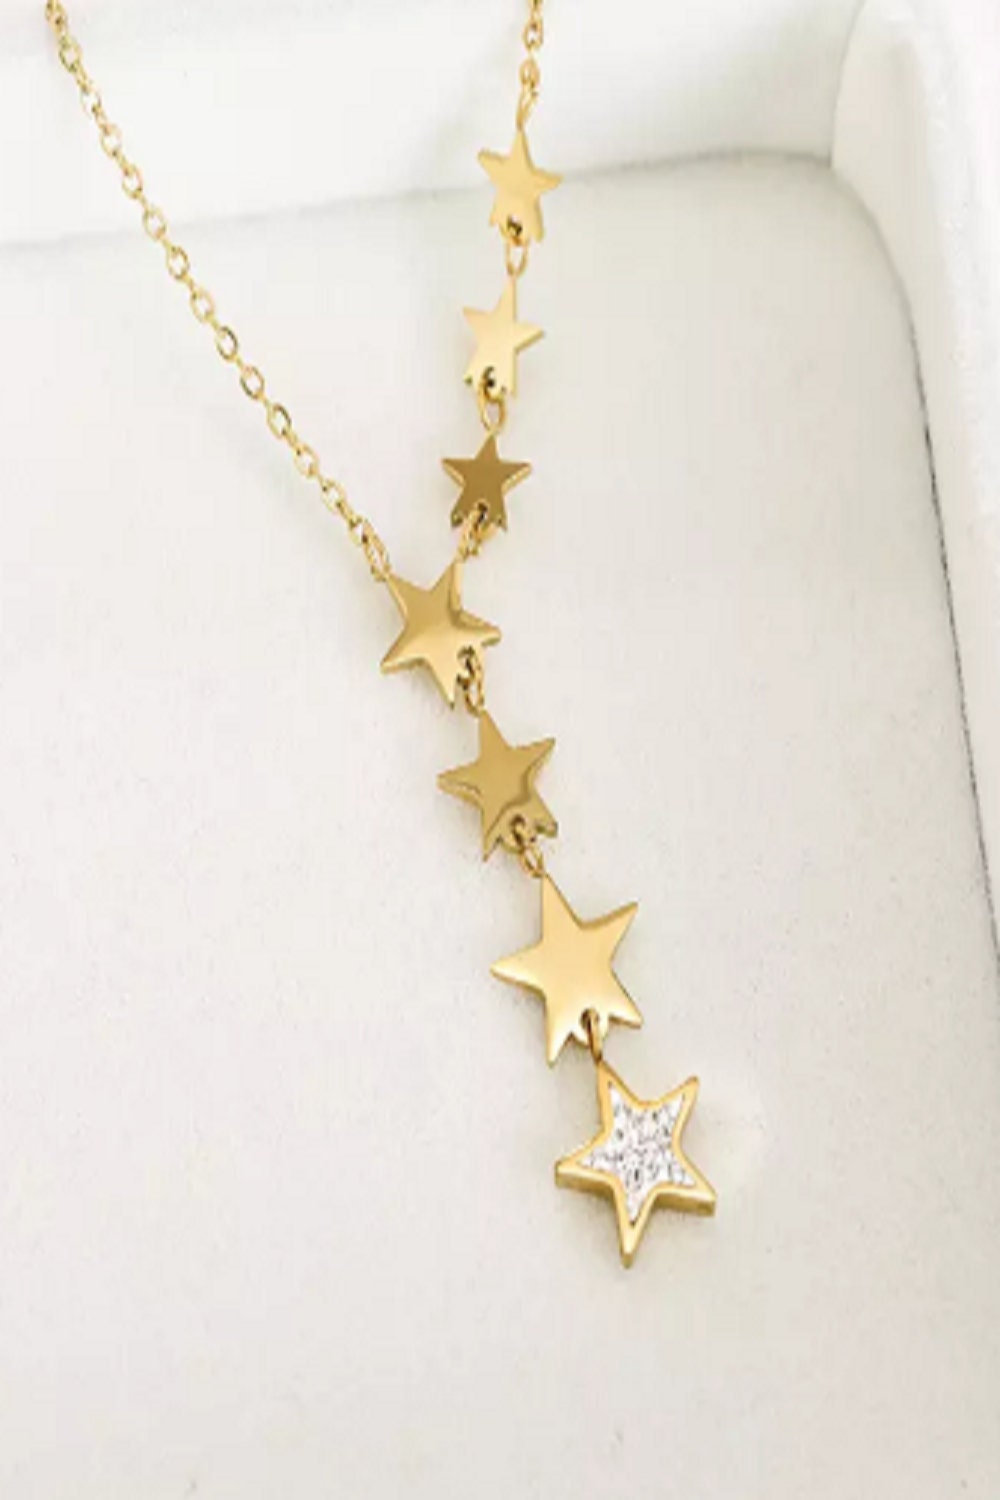 7 Star Necklace / Star Necklace With Charms/ Gold Star | Etsy